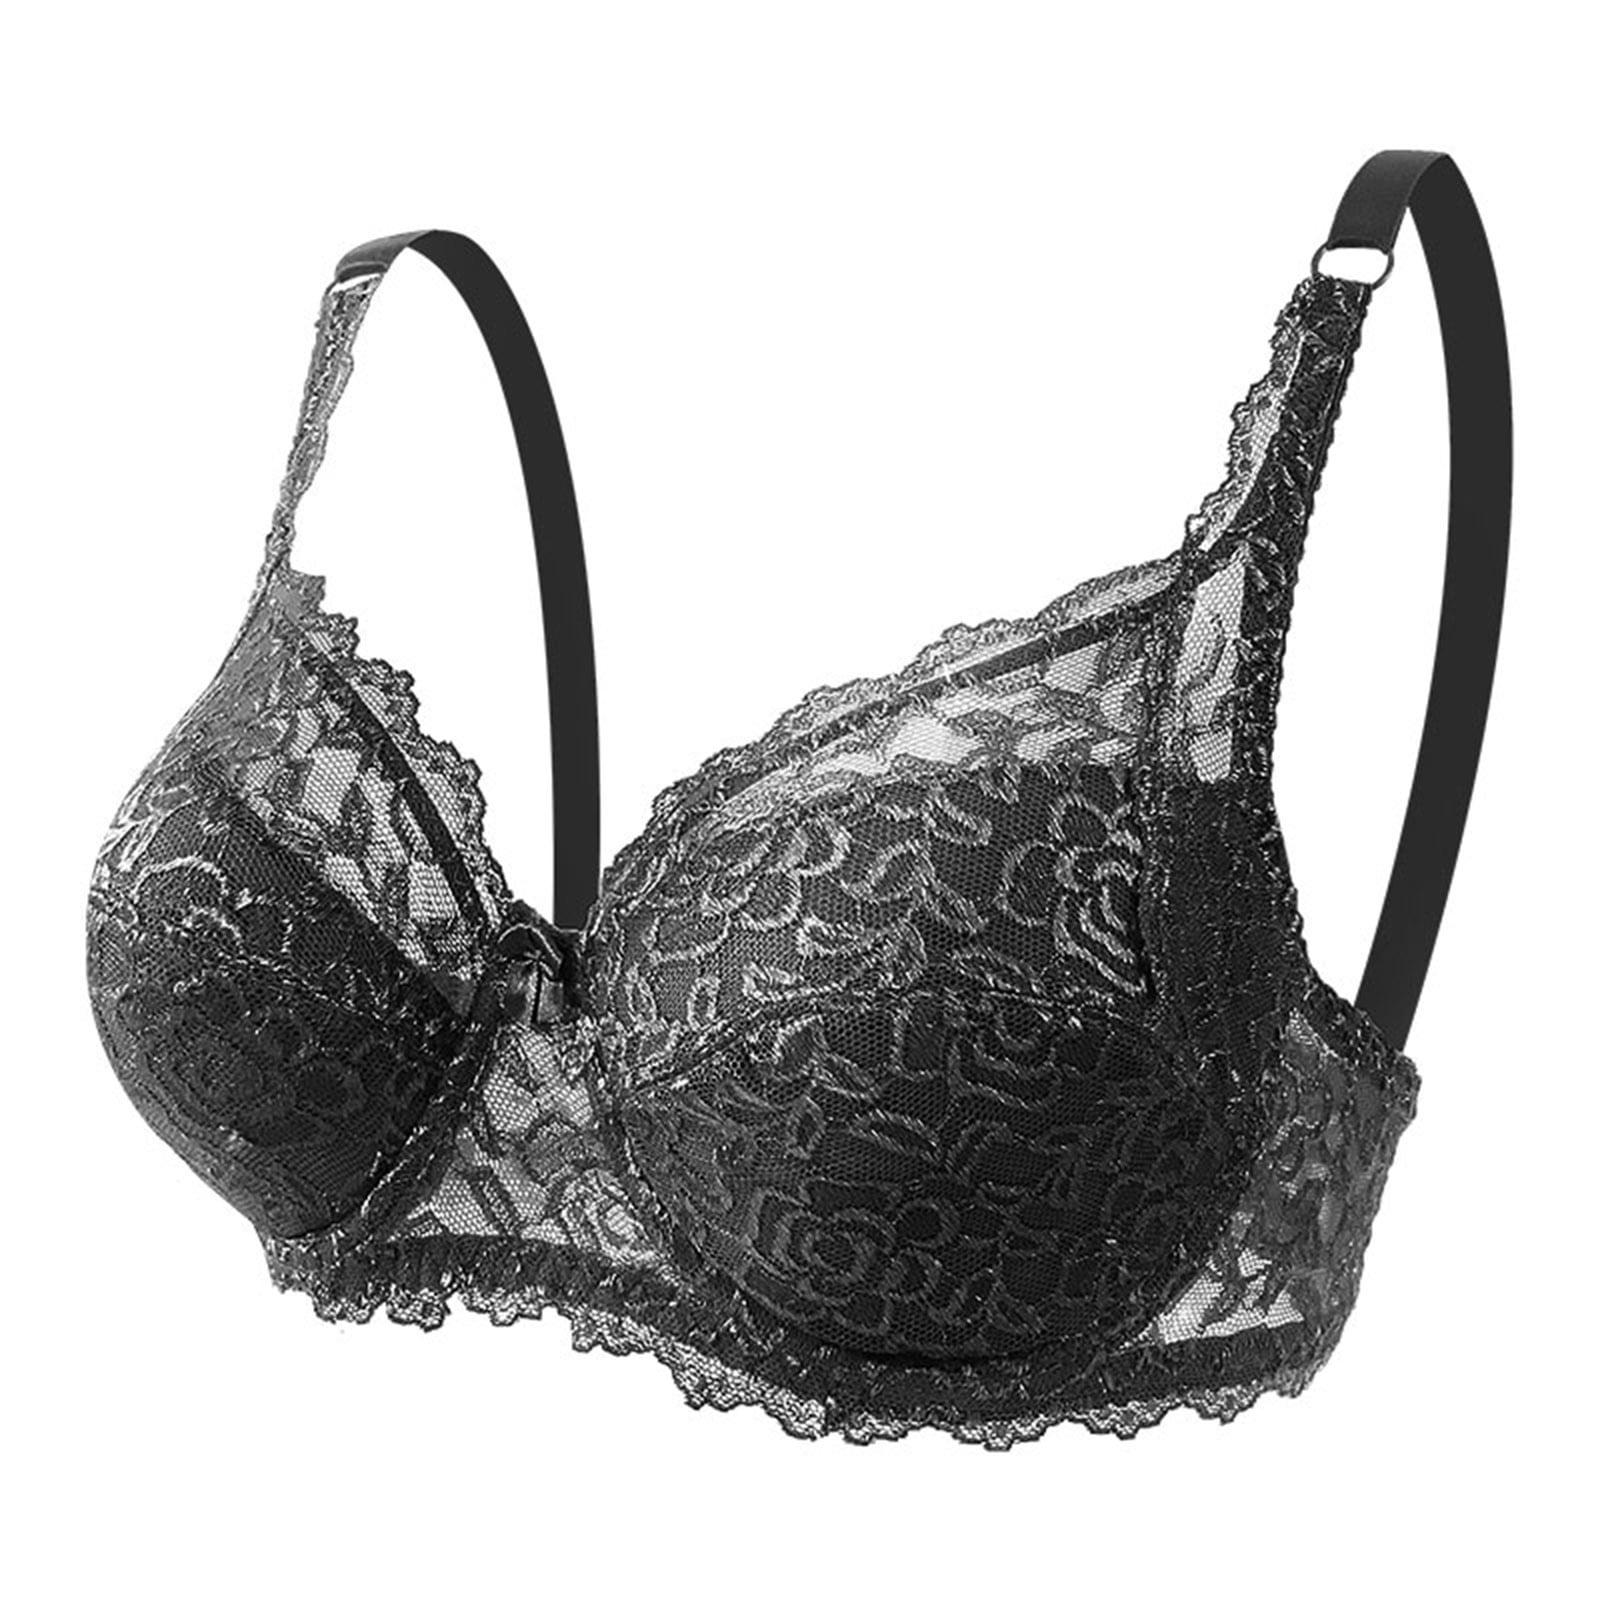 Xysaqa Women's Push Up Floral Lace Bra, Comfy Padded Plunging Lift